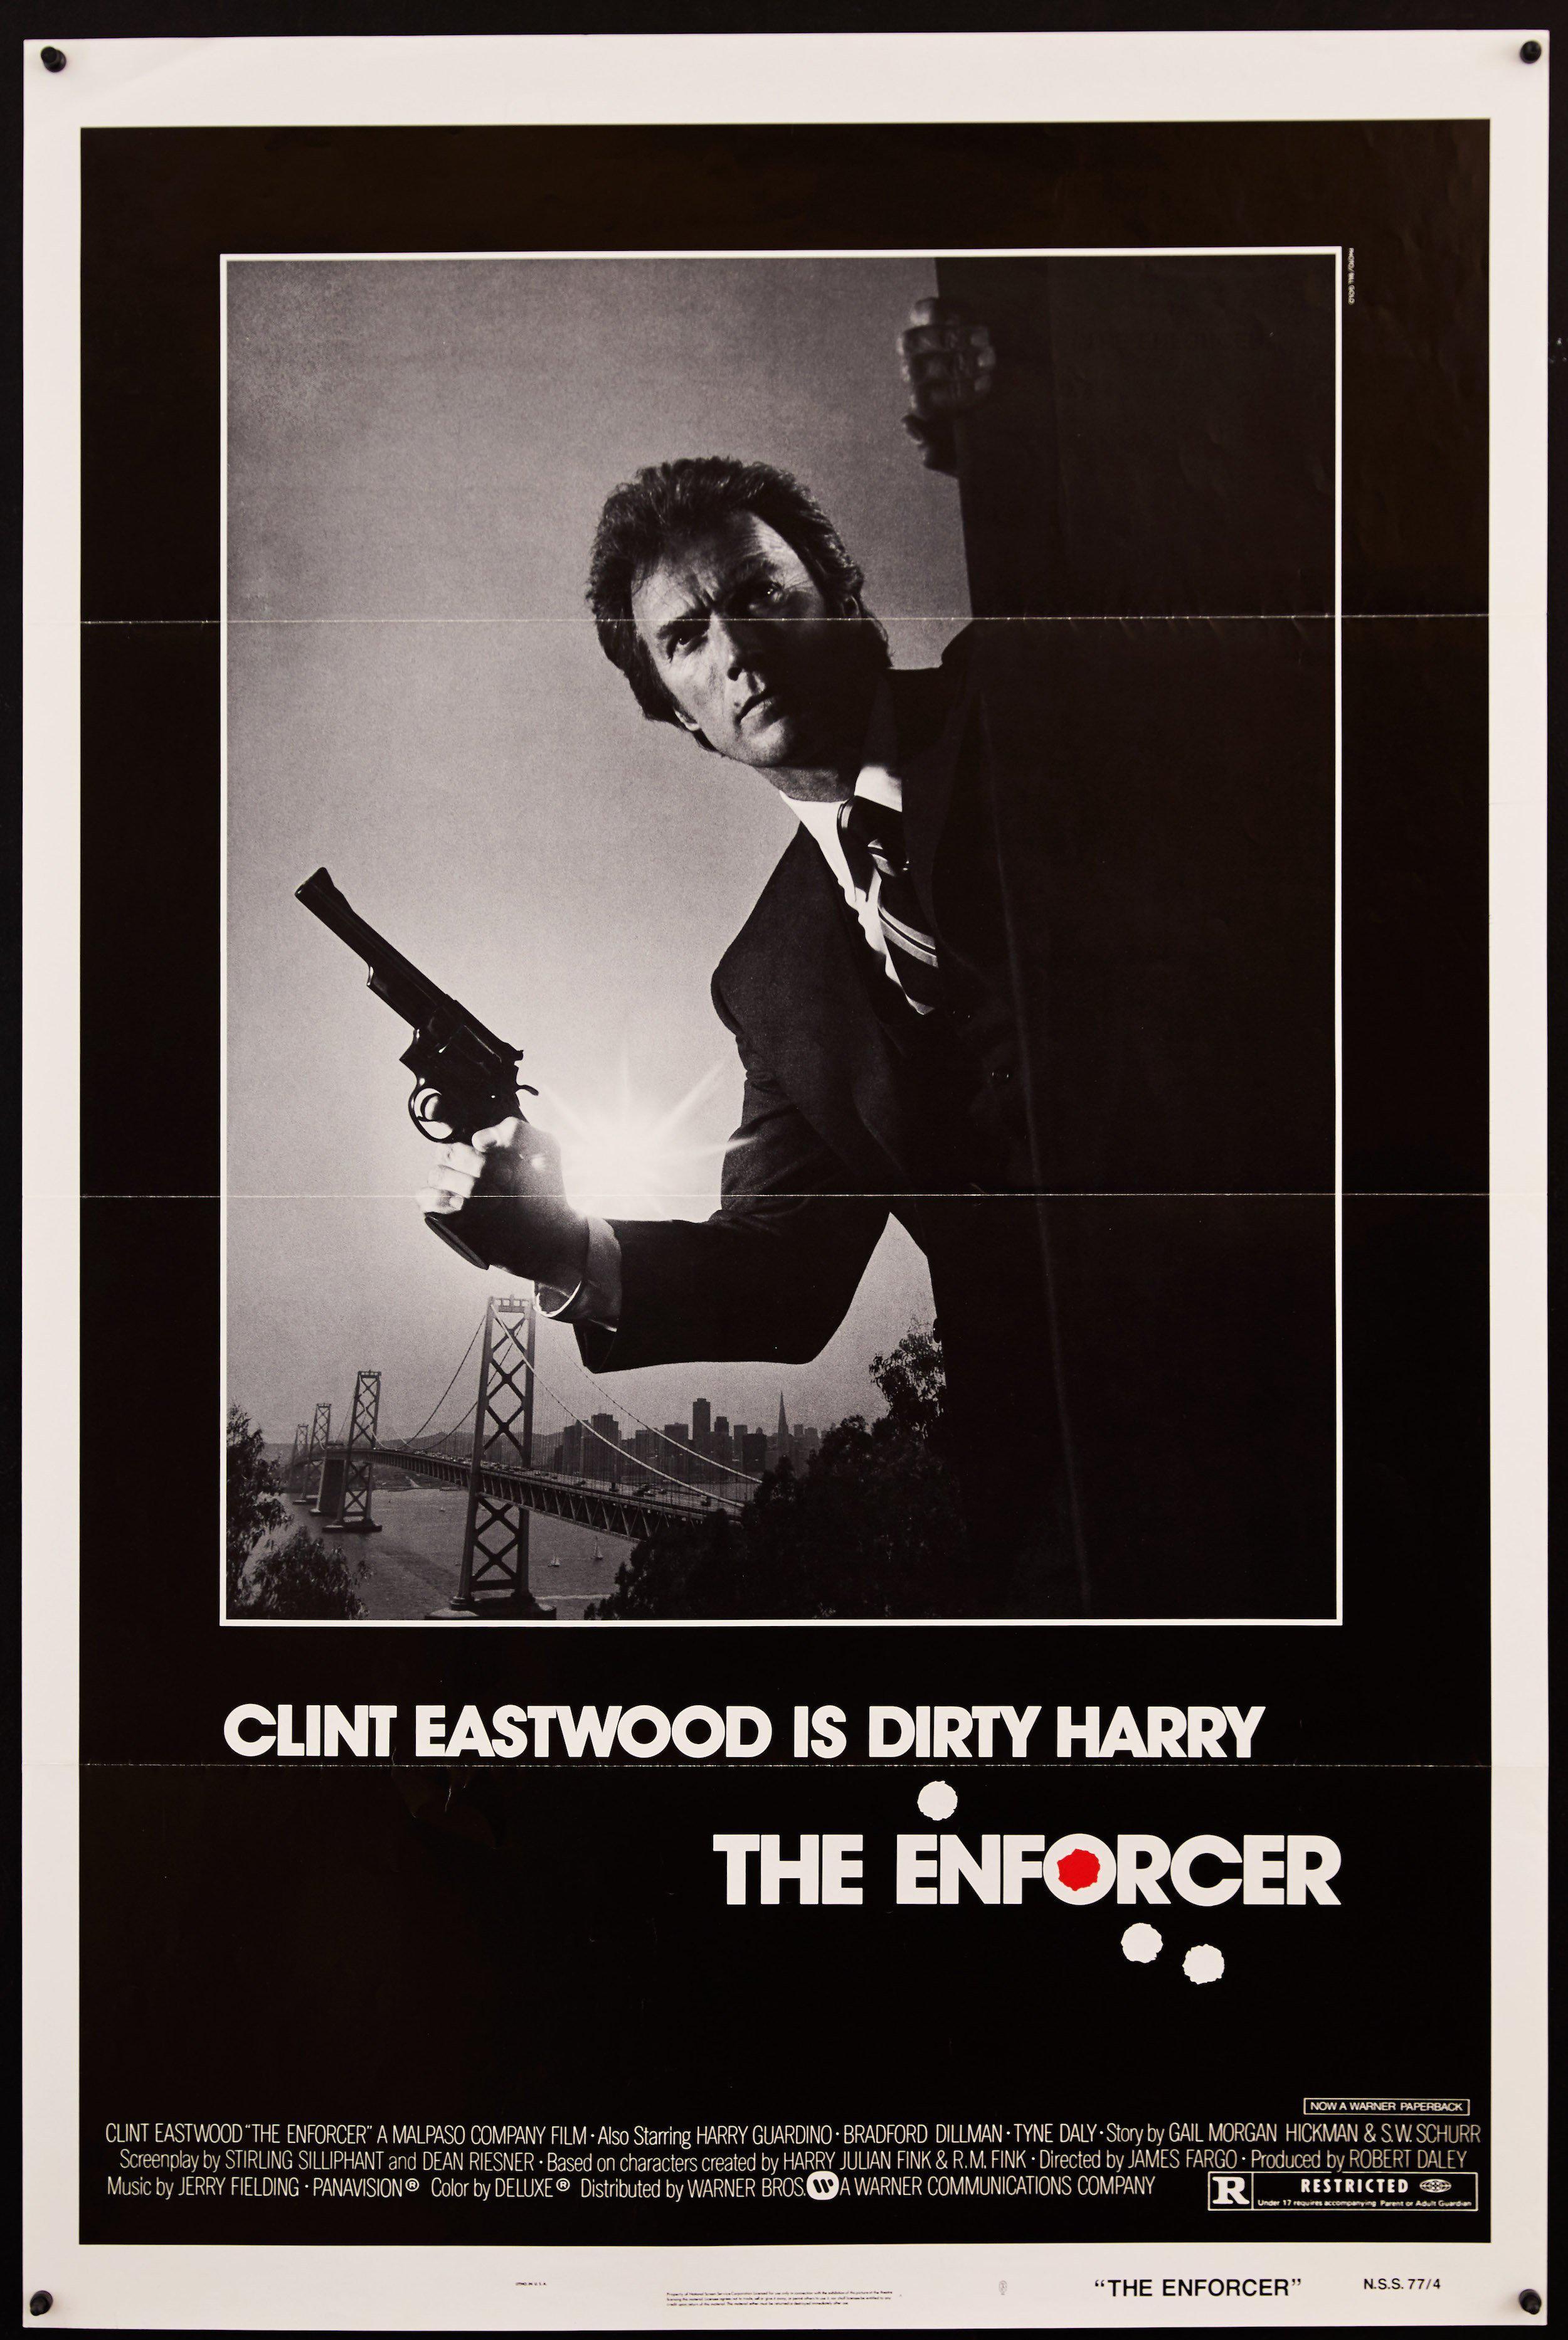 The Enforcer Movie Poster 1976 1 Sheet (27x41)